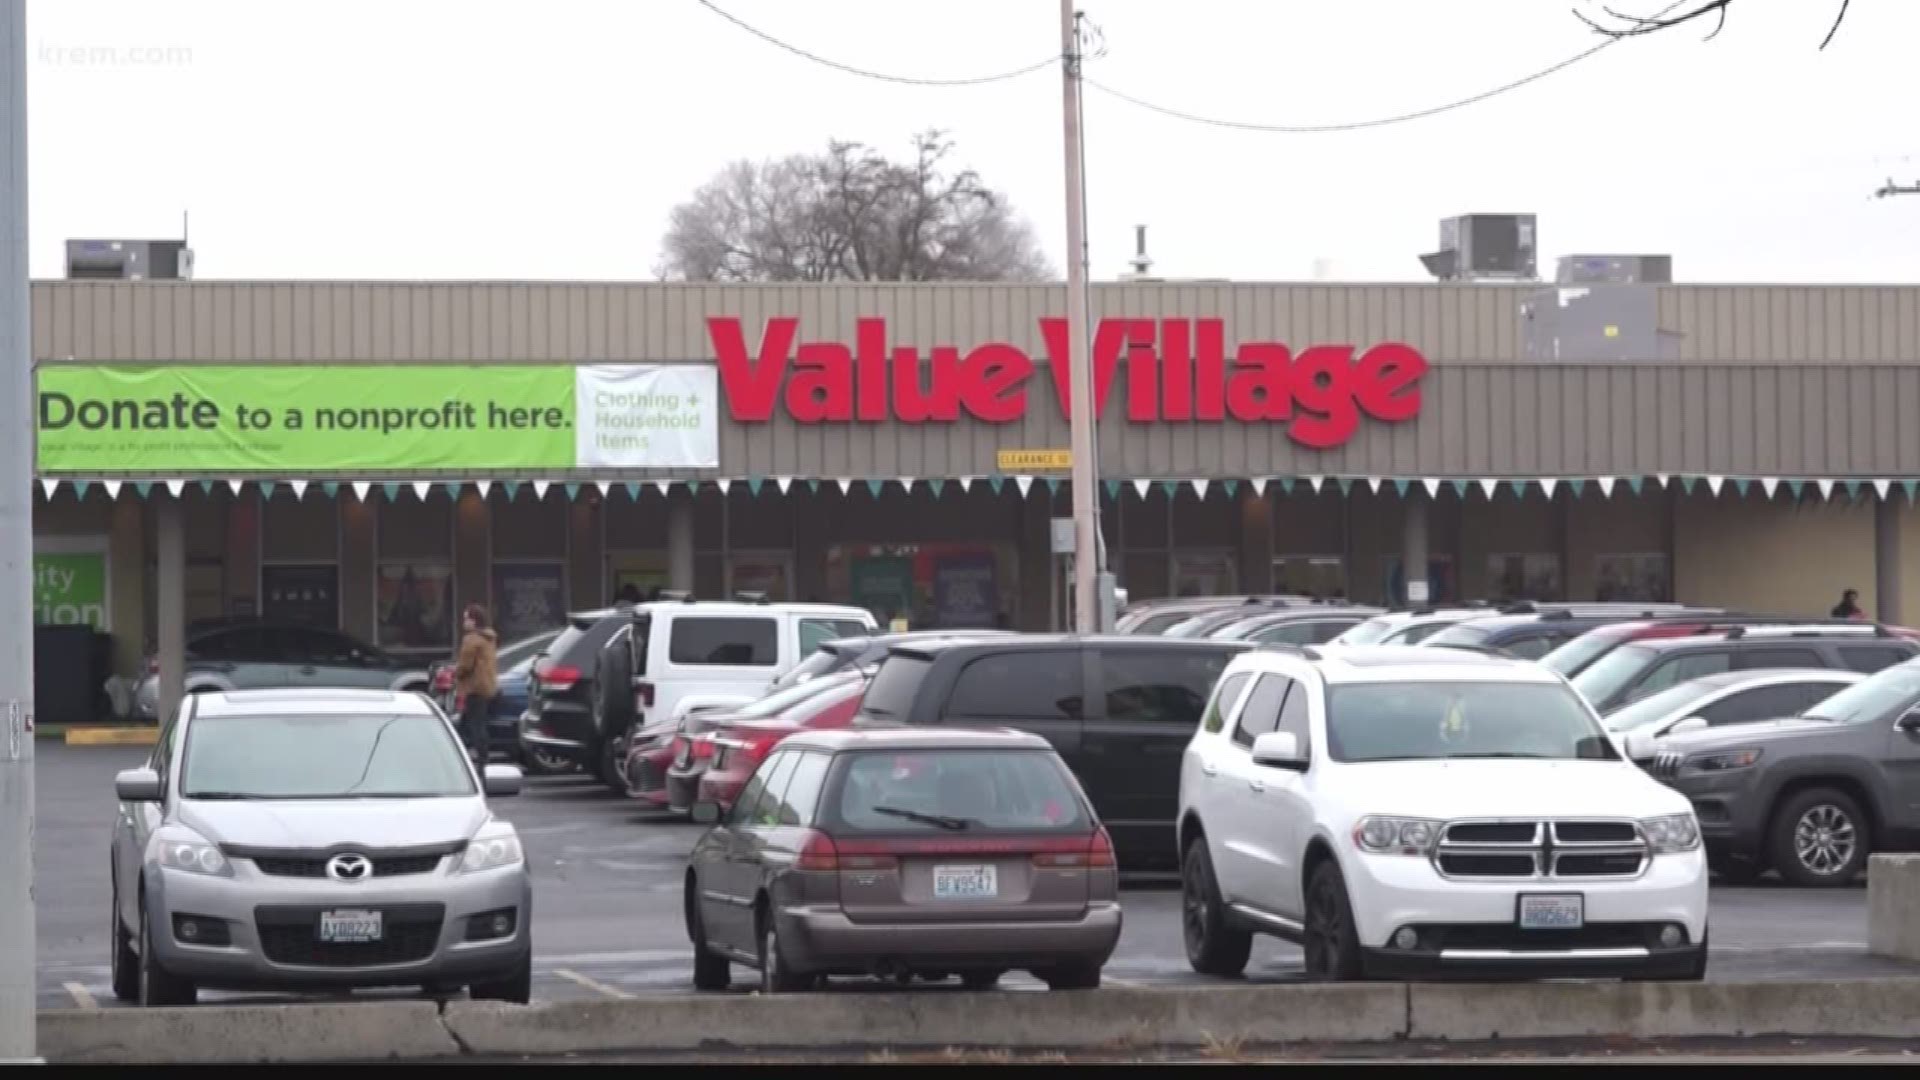 Judge Rogoff found Value Village deceived customers in the Spokane area when it advertised that purchases would benefit the Rypien Foundation.